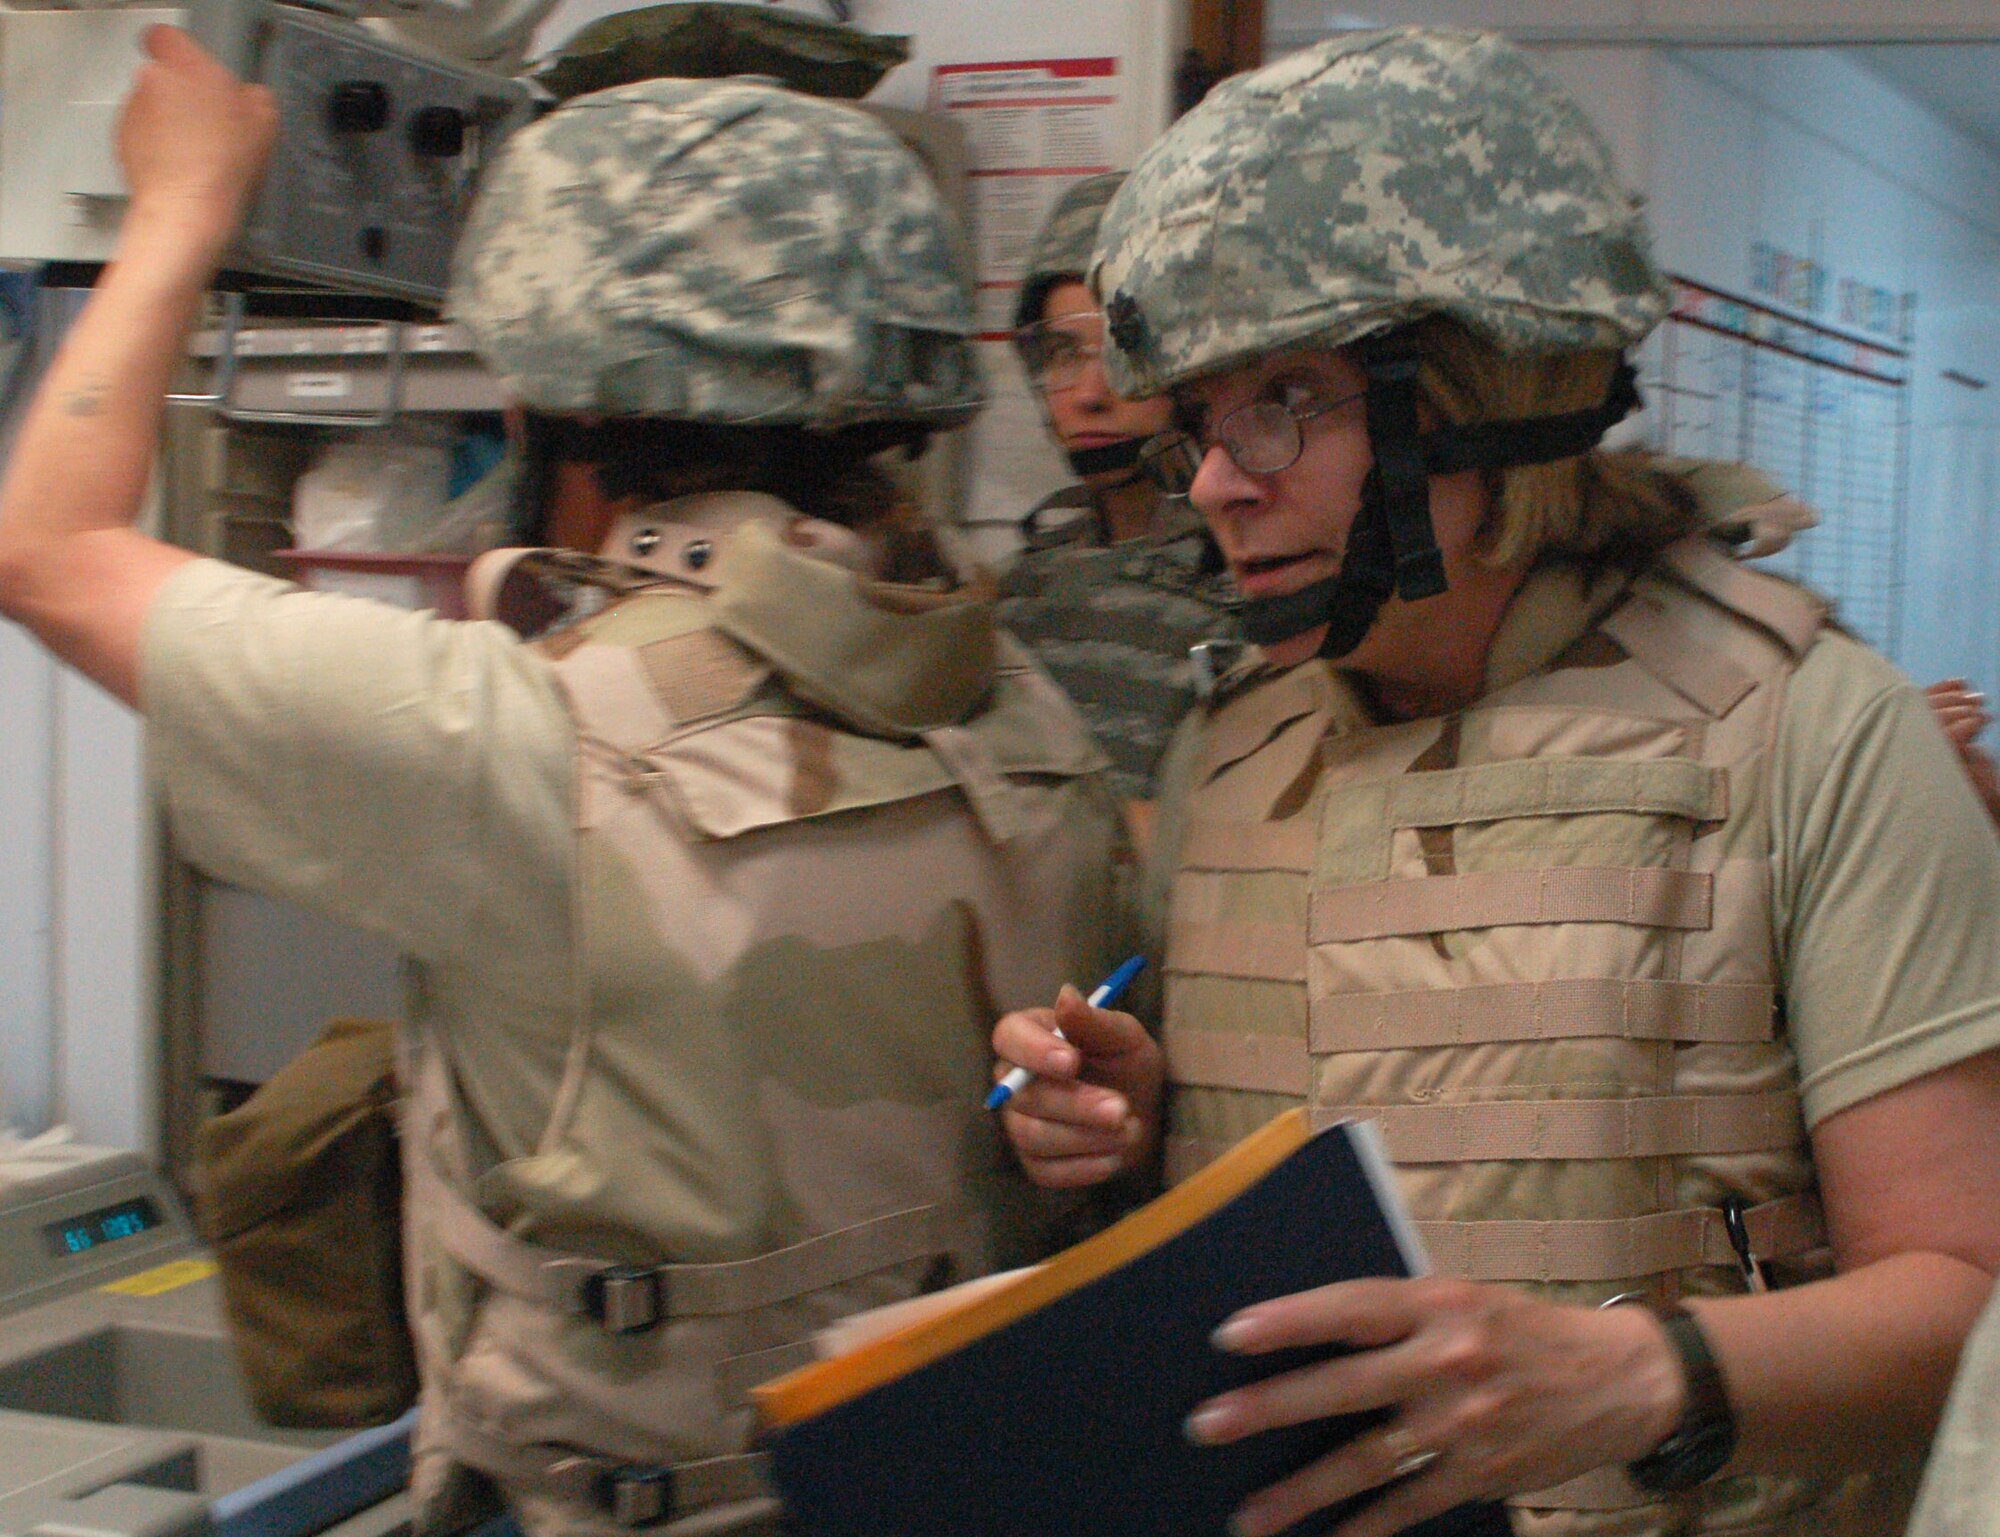 Lt. Col. Patricia Hartman rushes through the organized chaos of the trauma room March 21 at Sather Air Base, Iraq, during a training exercise. The exercise is designed to teach medical skills to non-clinical members. In a combat environment, these procedures can be done by anyone with training, leaving the doctors to tend to the seriously injured. Colonel Hartman is the 447th Expeditionary Medical Squadron's chief administrator.  (U.S. Air Force photo/Tech. Sgt. Amanda Callahan) 